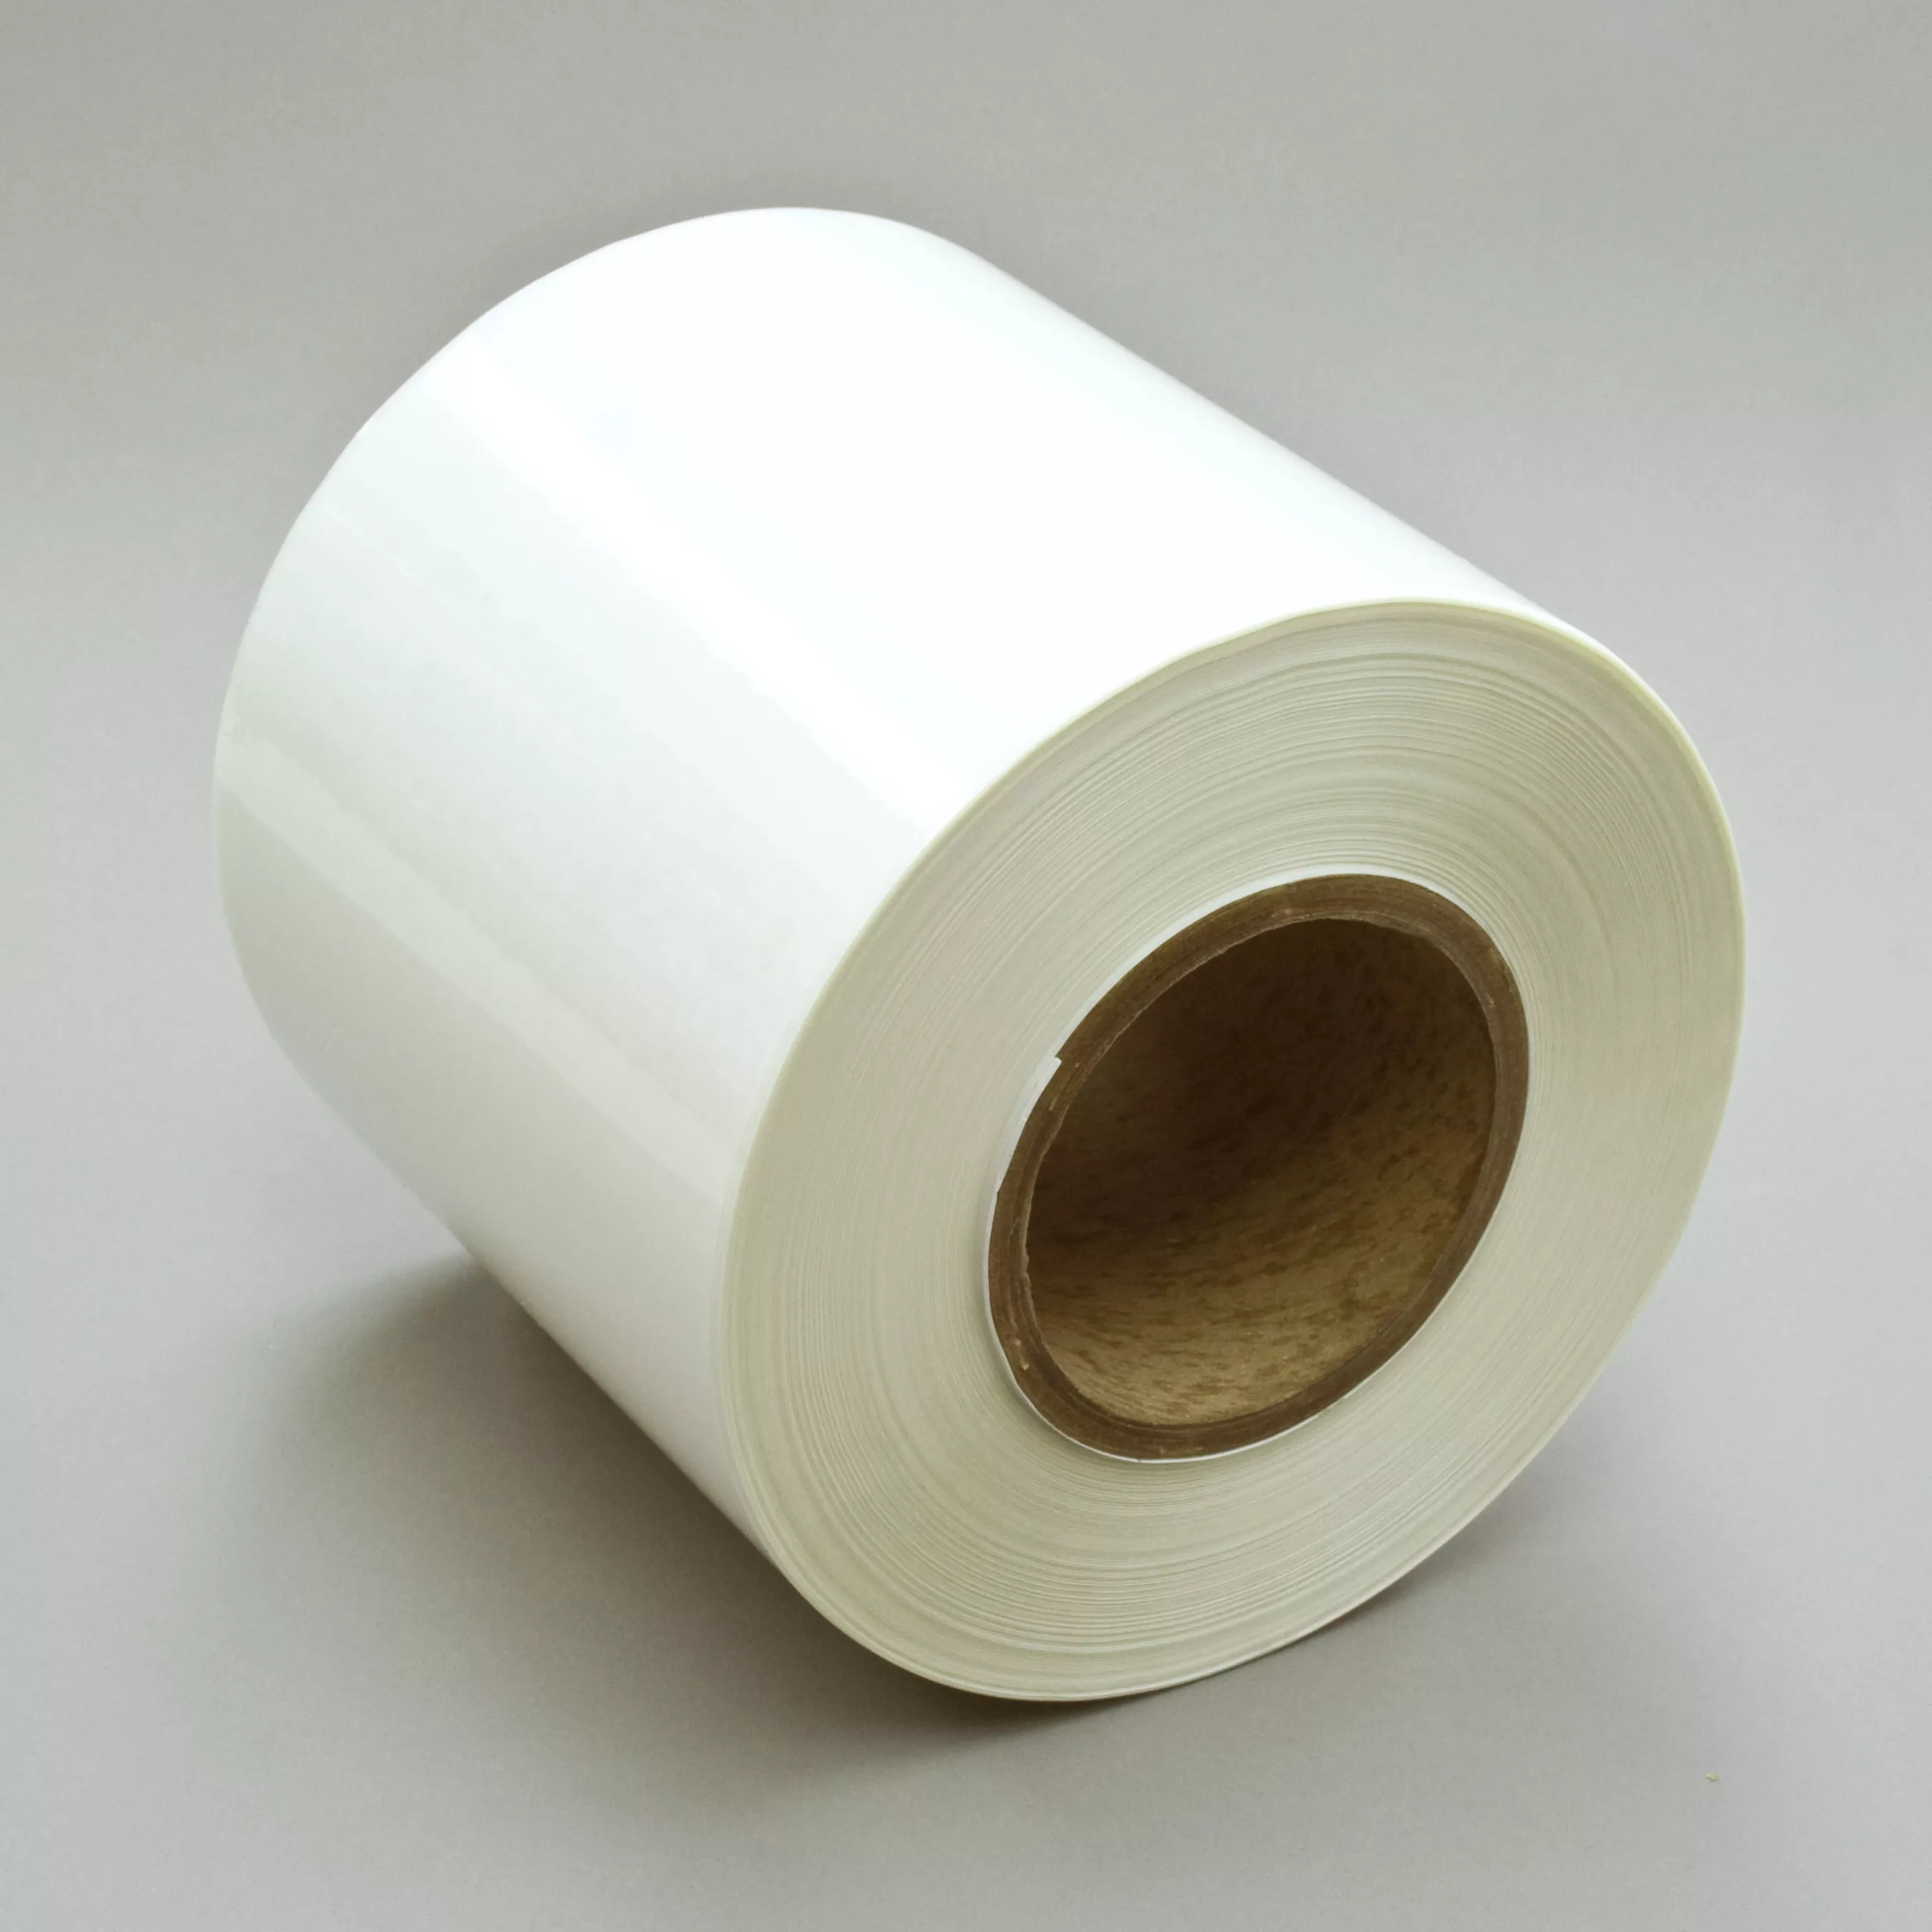 3M™ Sheet and Screen Label Material 7905, Clear Polyester, 508 mm x 686 mm, 100 Sheet/Case